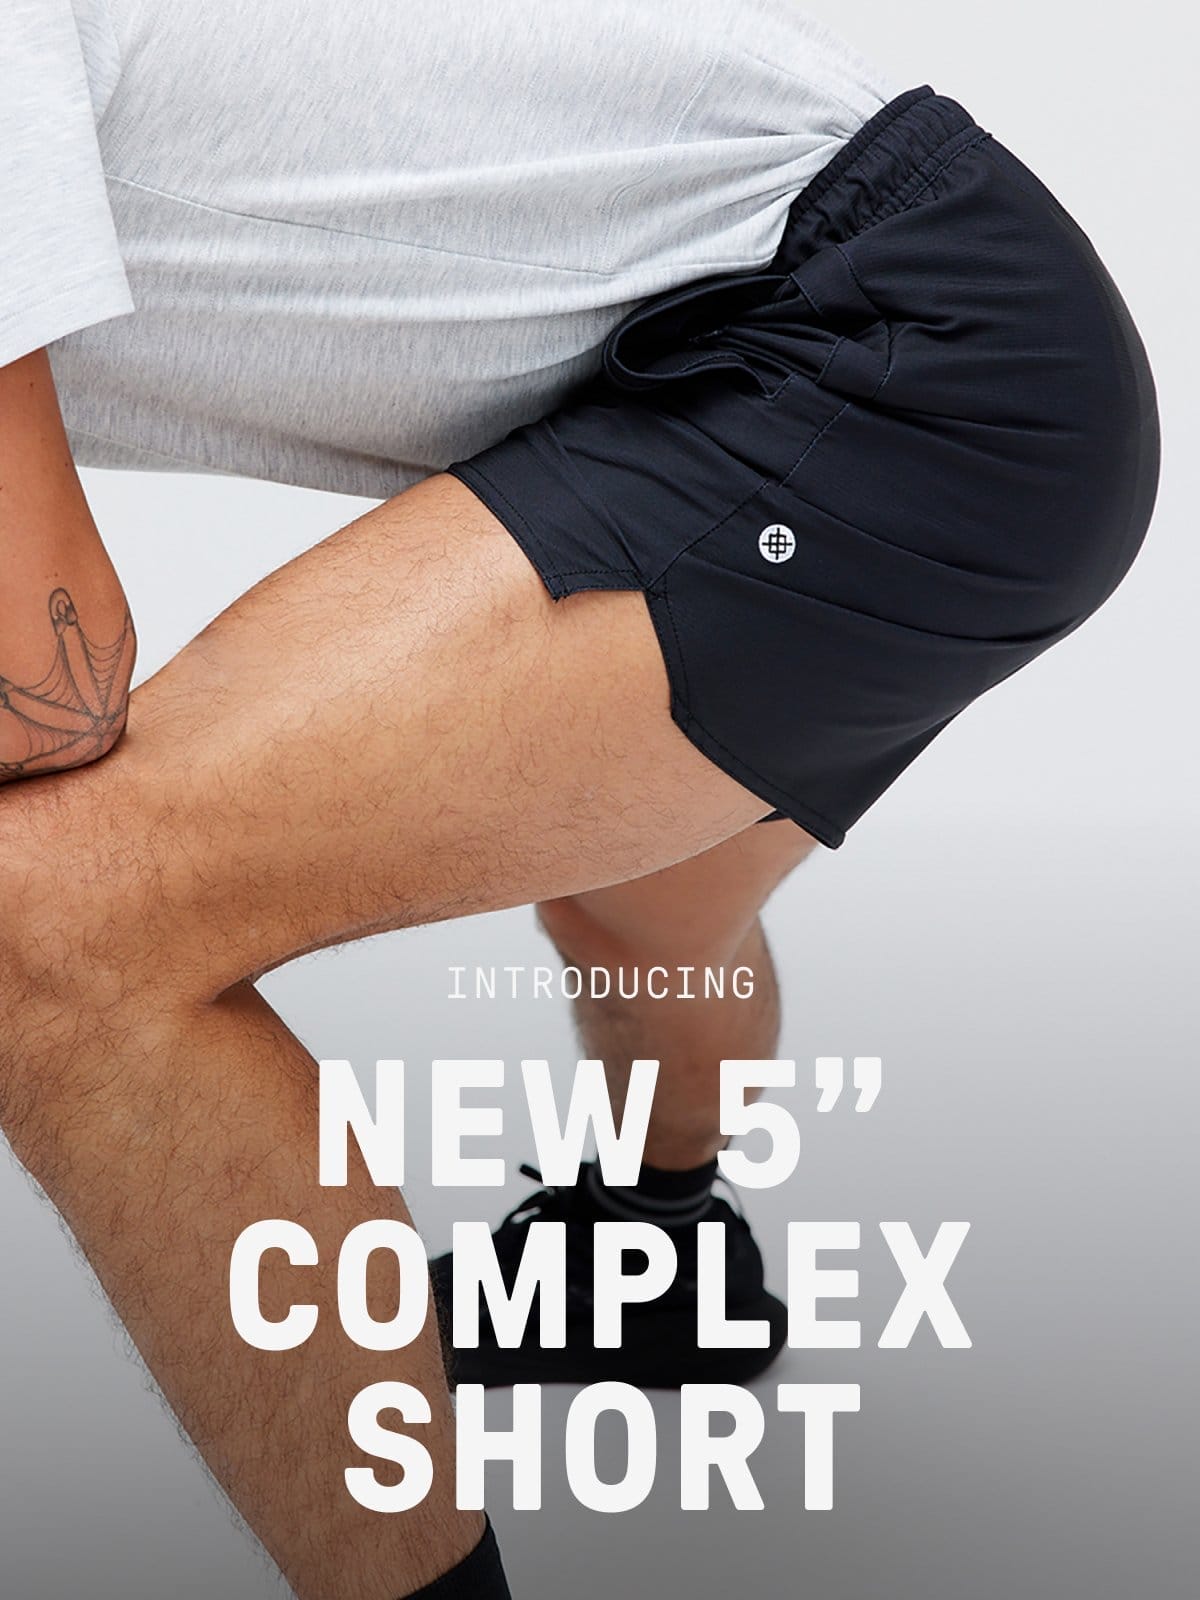 New 5 inch complex short